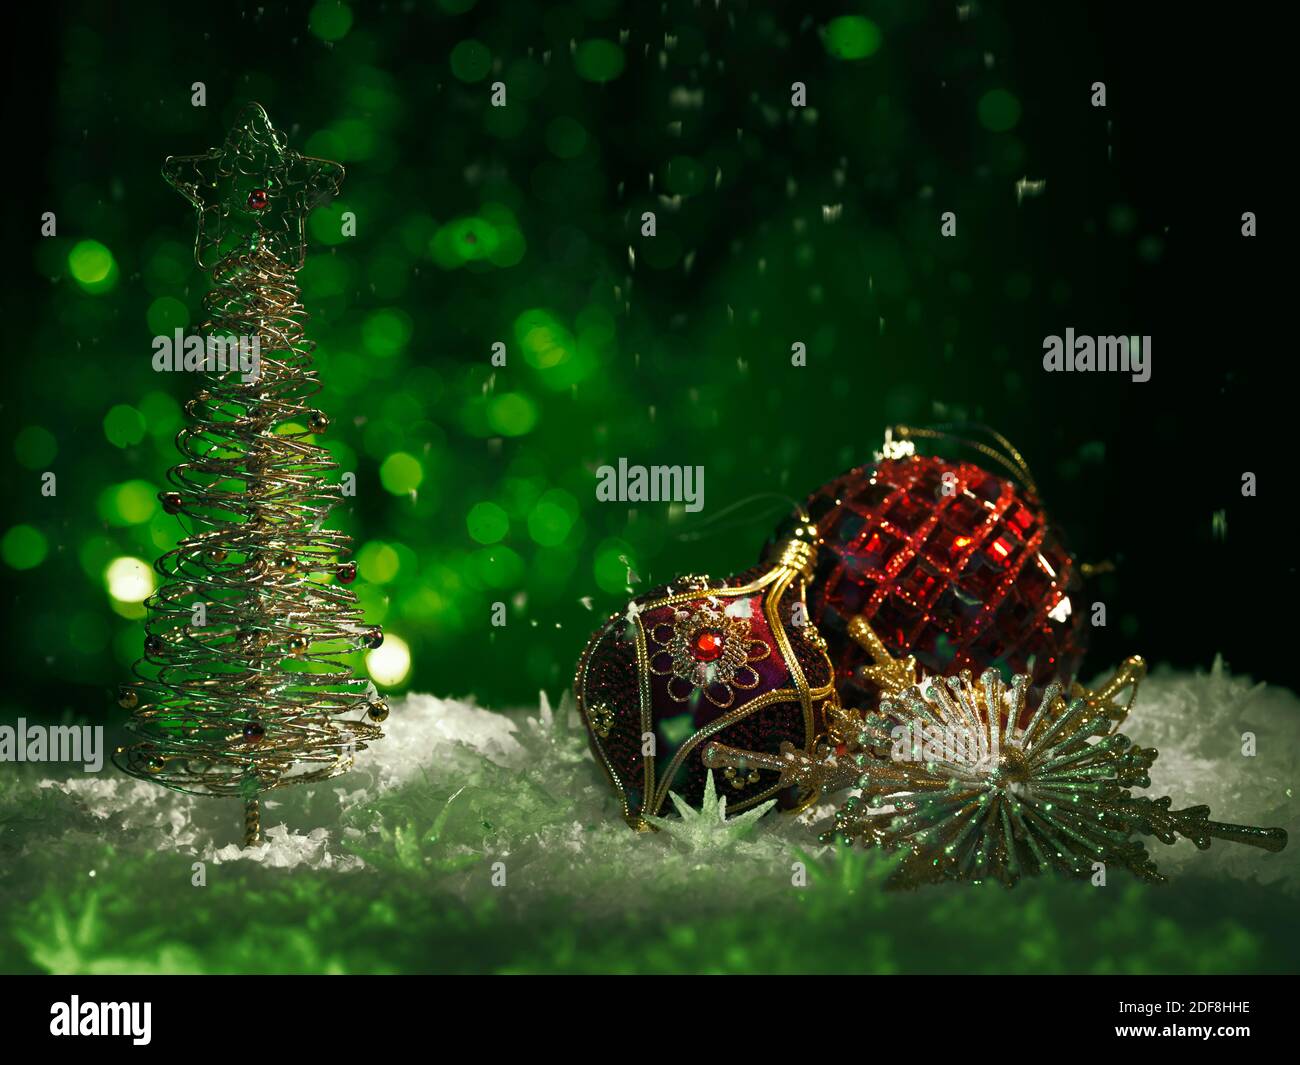 Red Christmas ornament and a shiny Christmas tree on green background with falling snow in moody dark settings. Artistic winter holidays, new year con Stock Photo